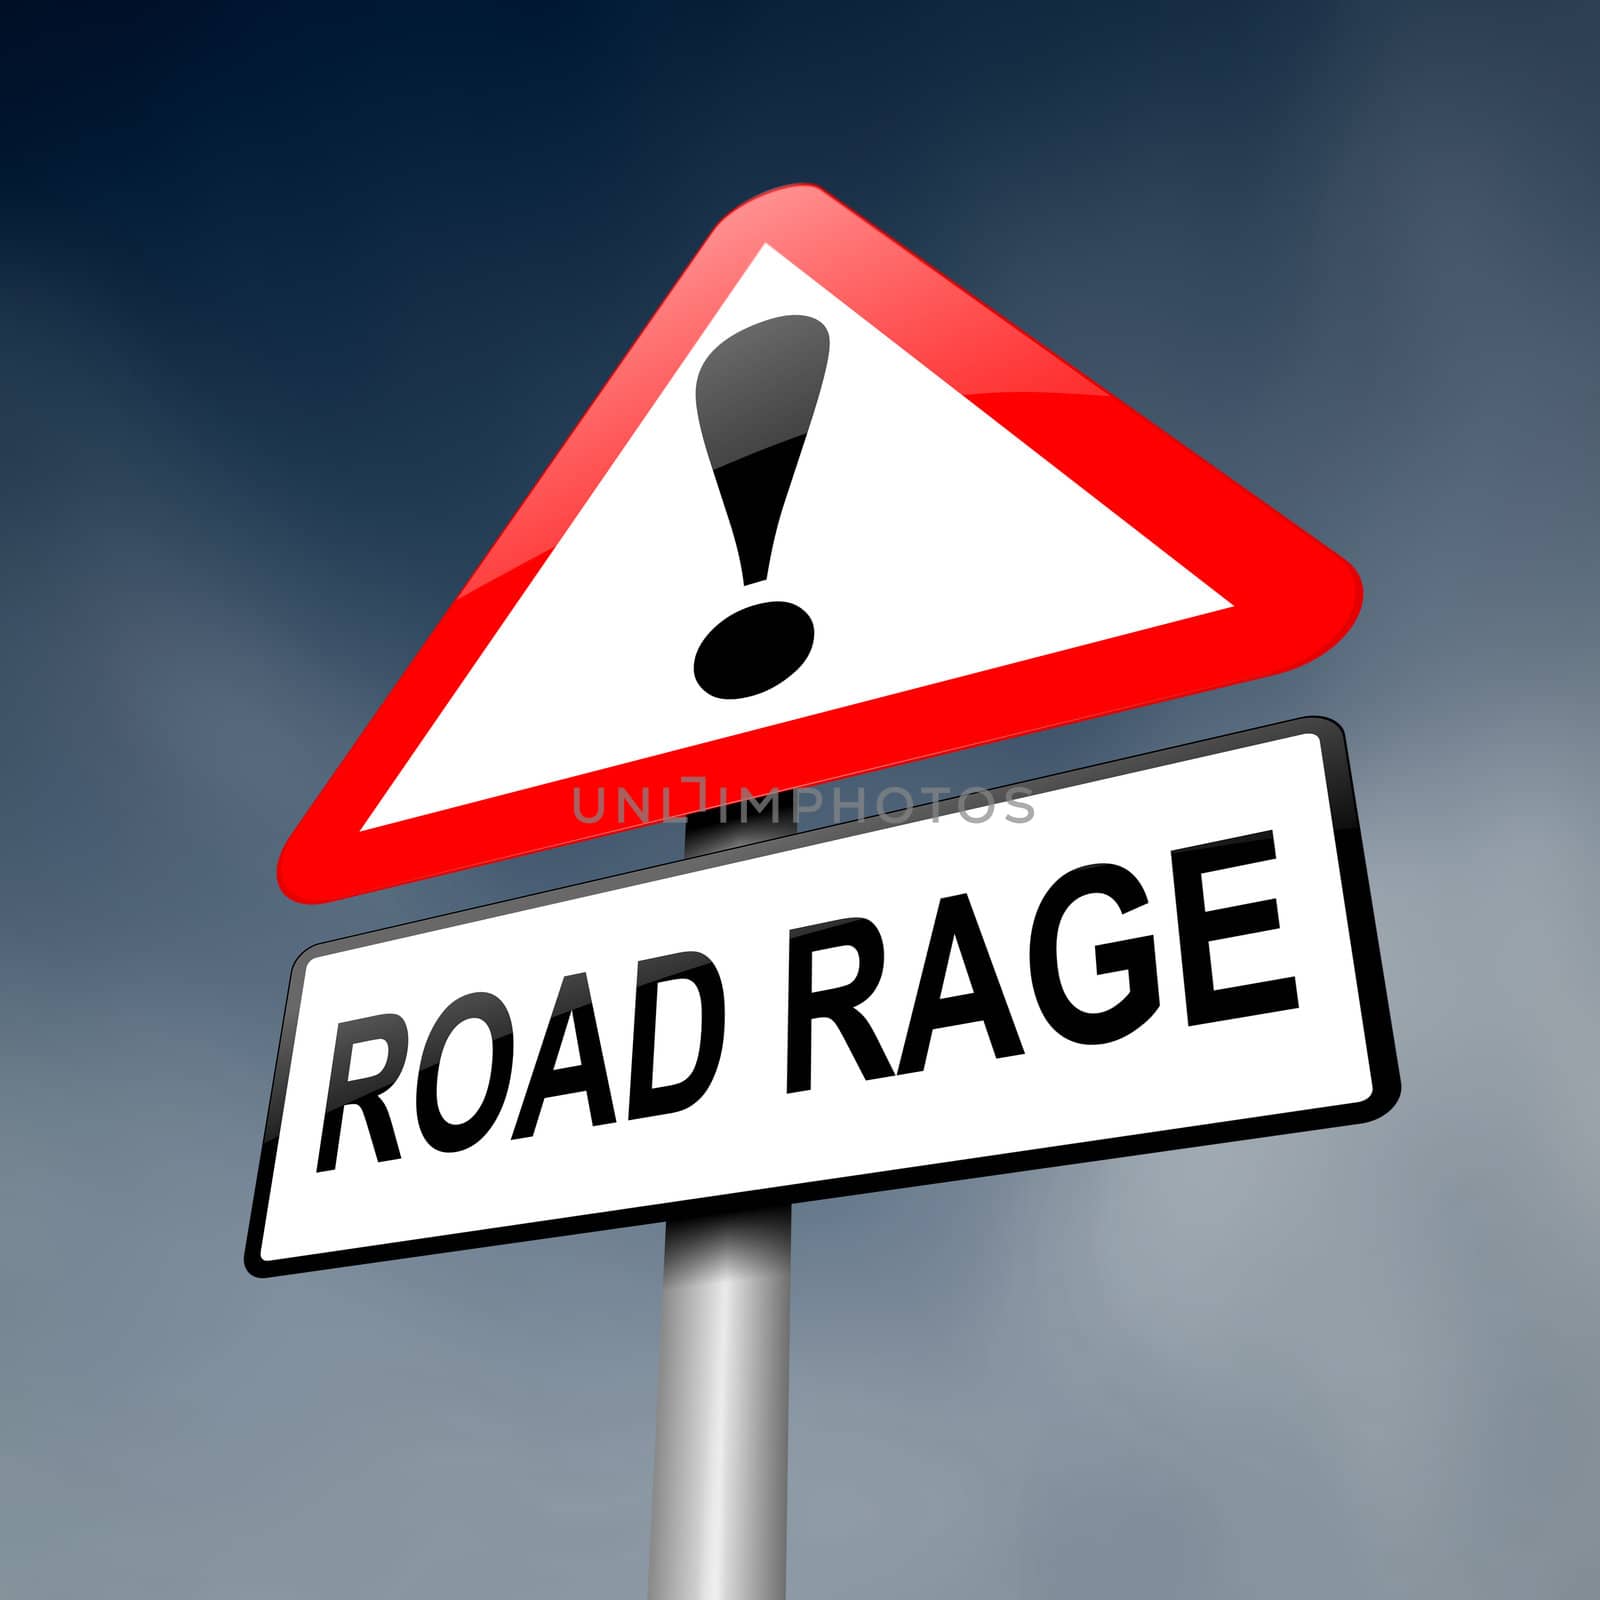 Illustration depicting a road traffic sign with a road rage concept. Dark sky background.